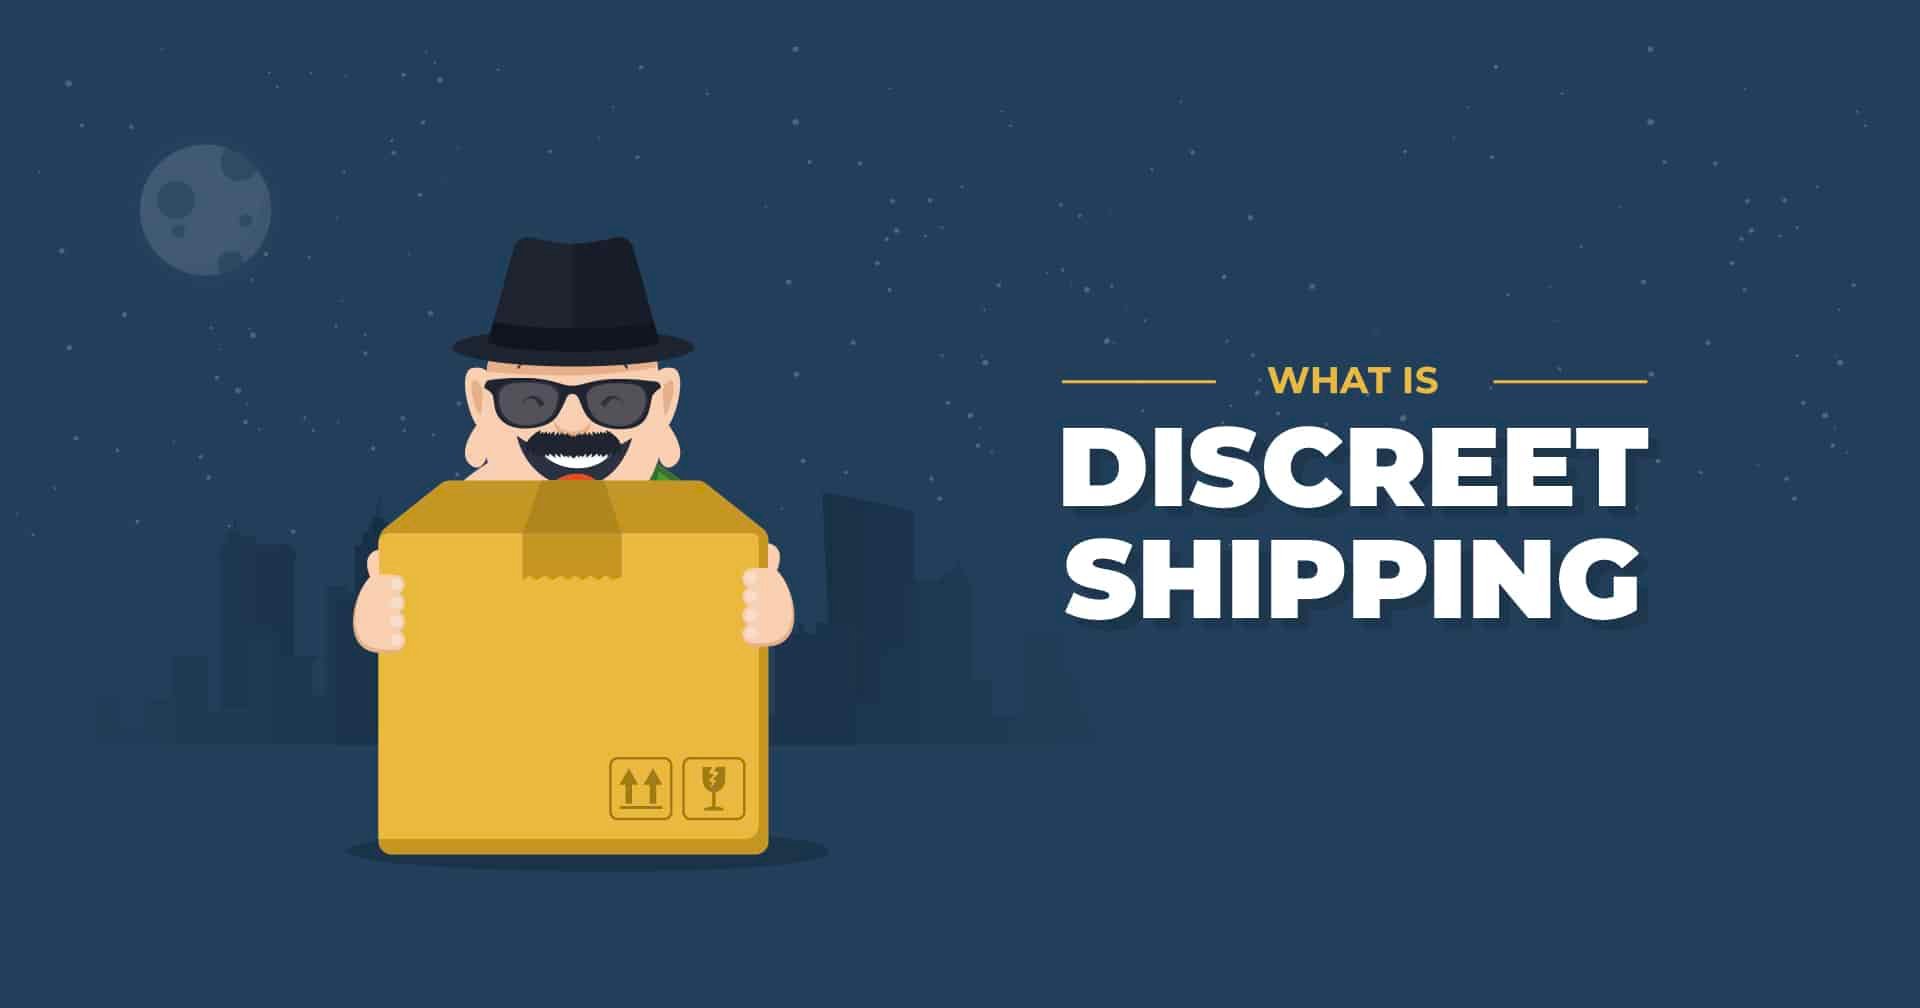 Guide to Discreet Shipping